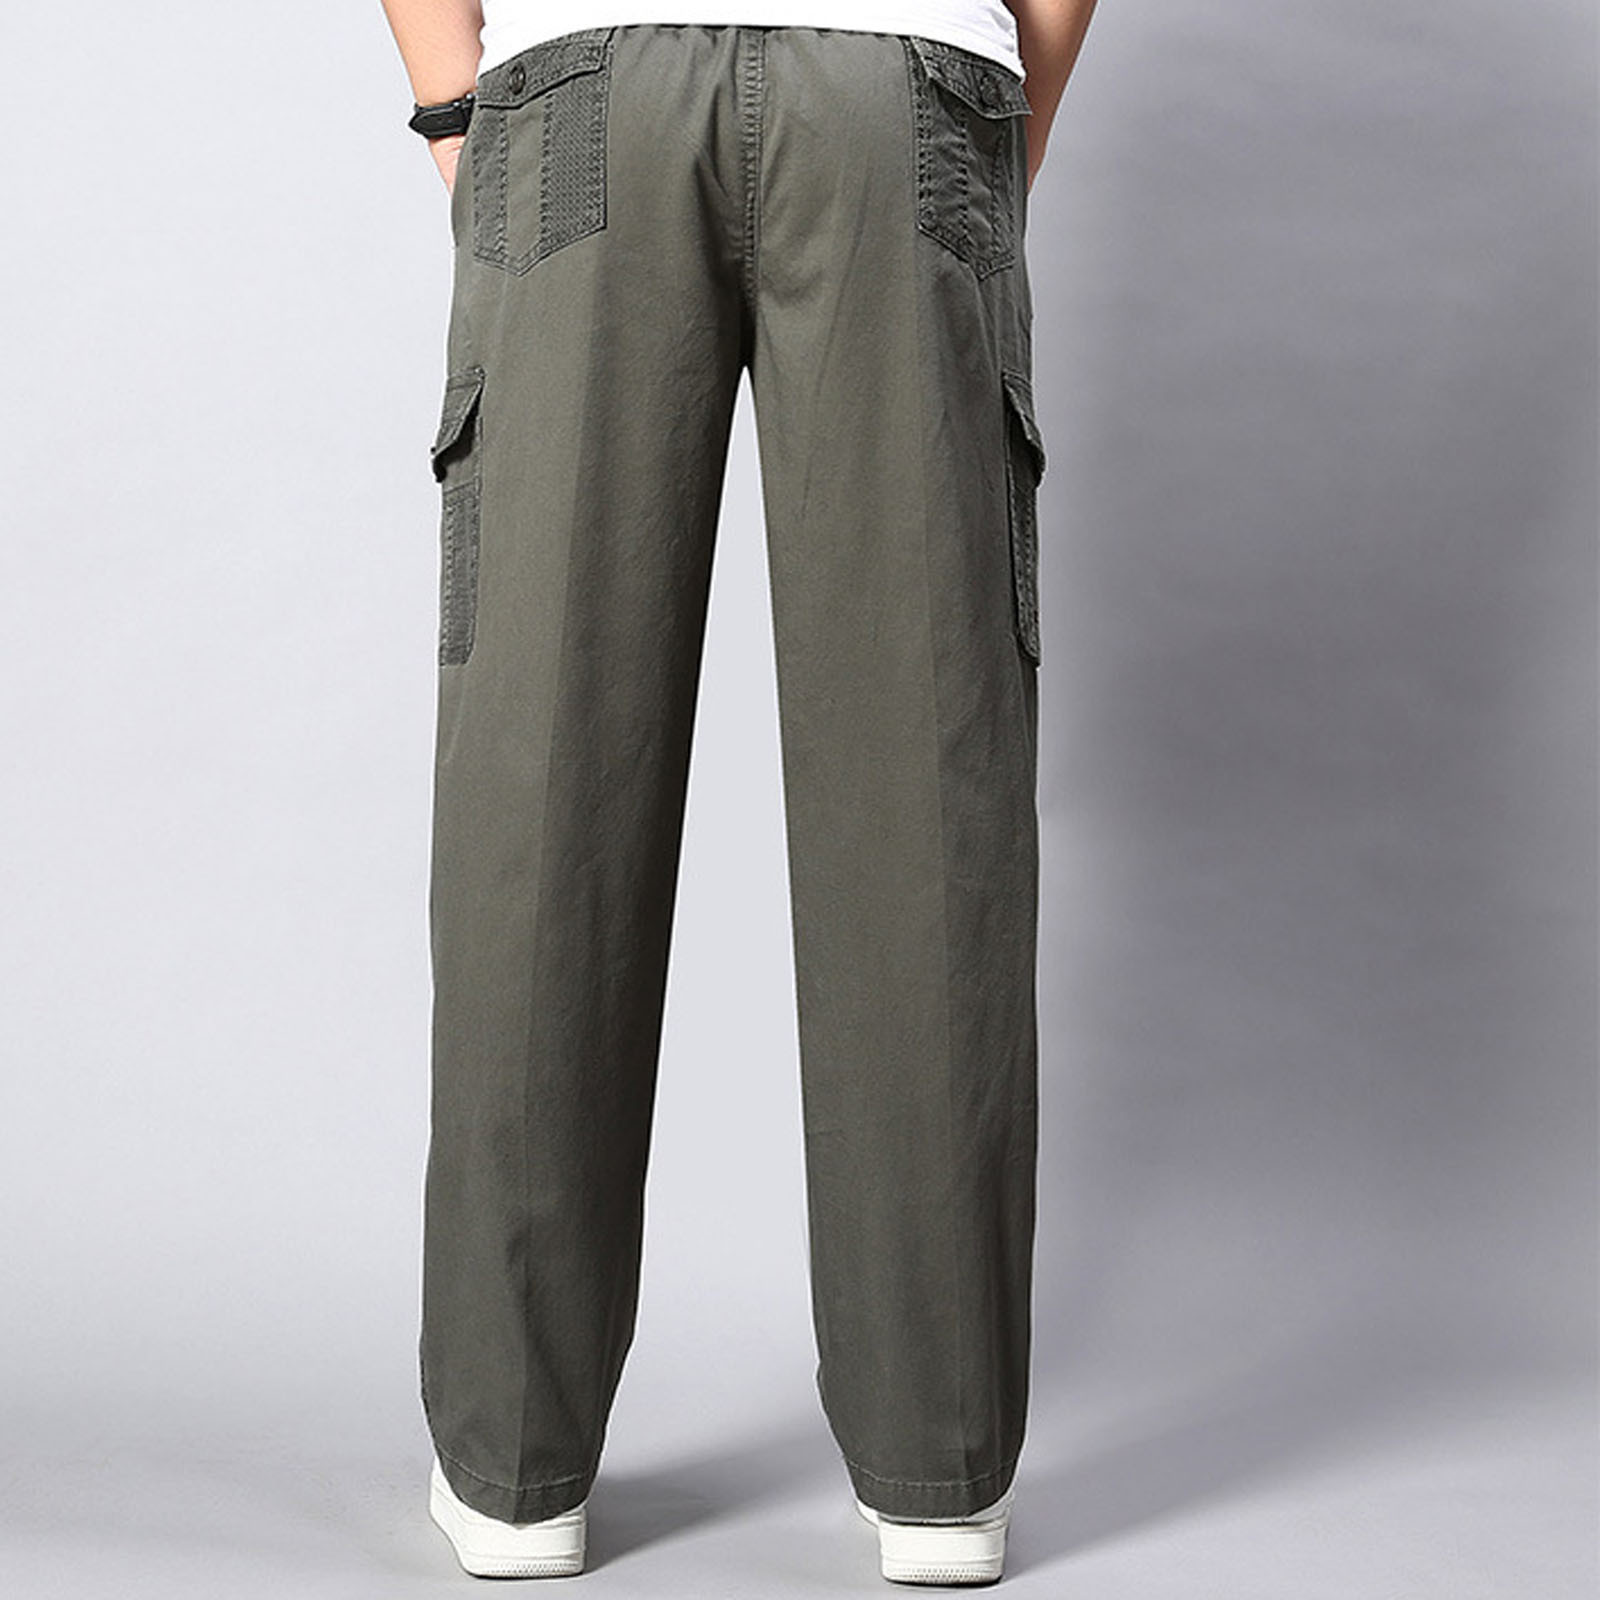 Viikei Cargo Pants, Mens Pants Clearance under $15 Men's Cotton and ...